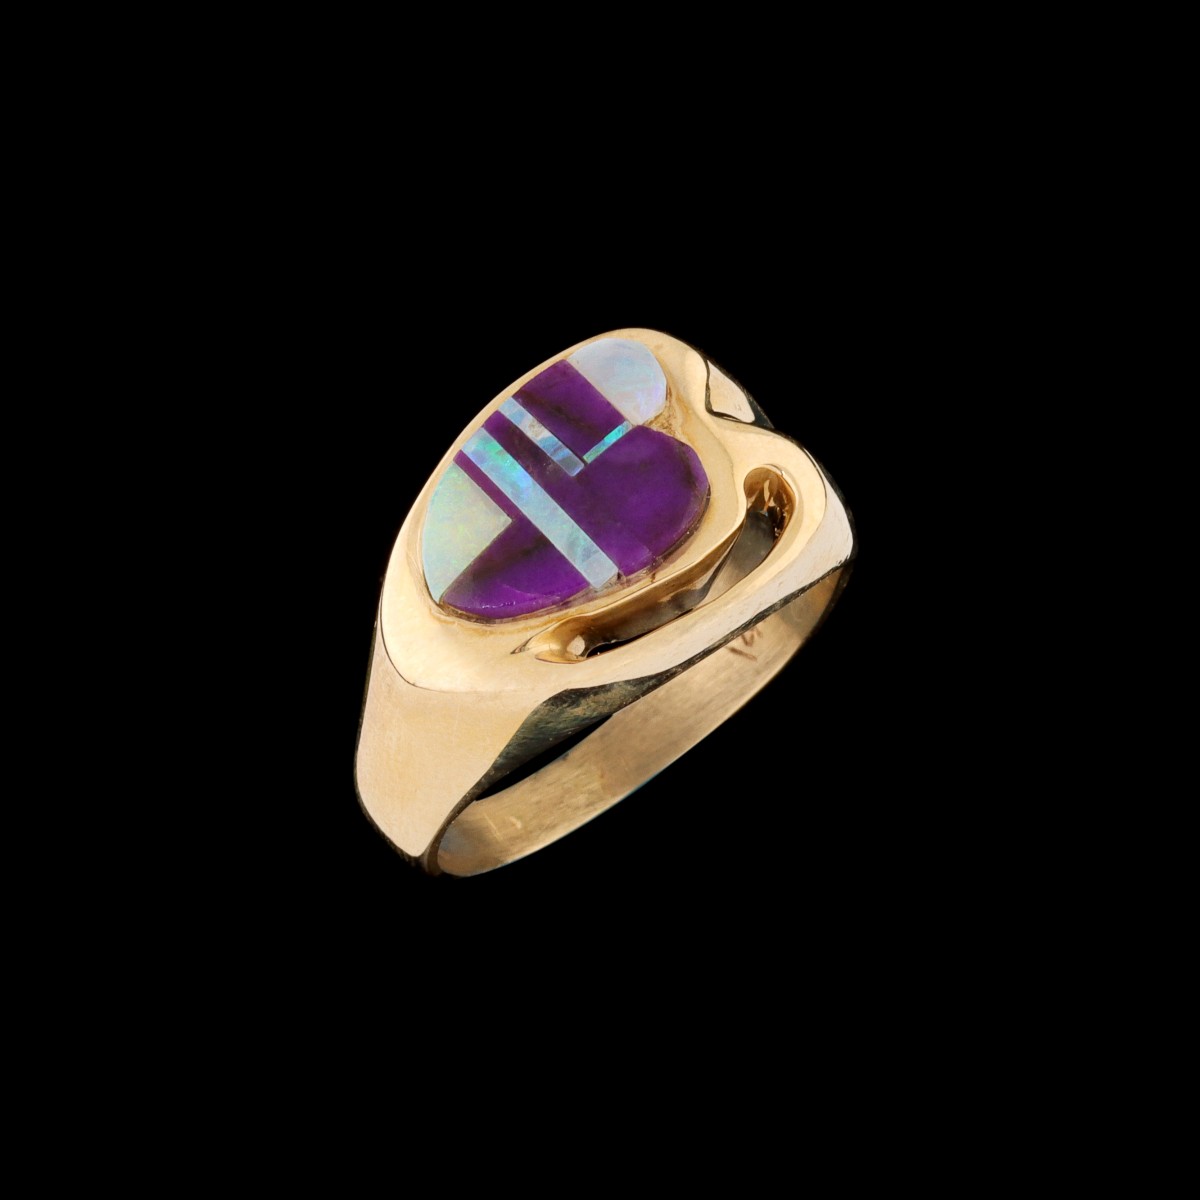 A 14K YELLOW GOLD RING WITH INLAID OPAL